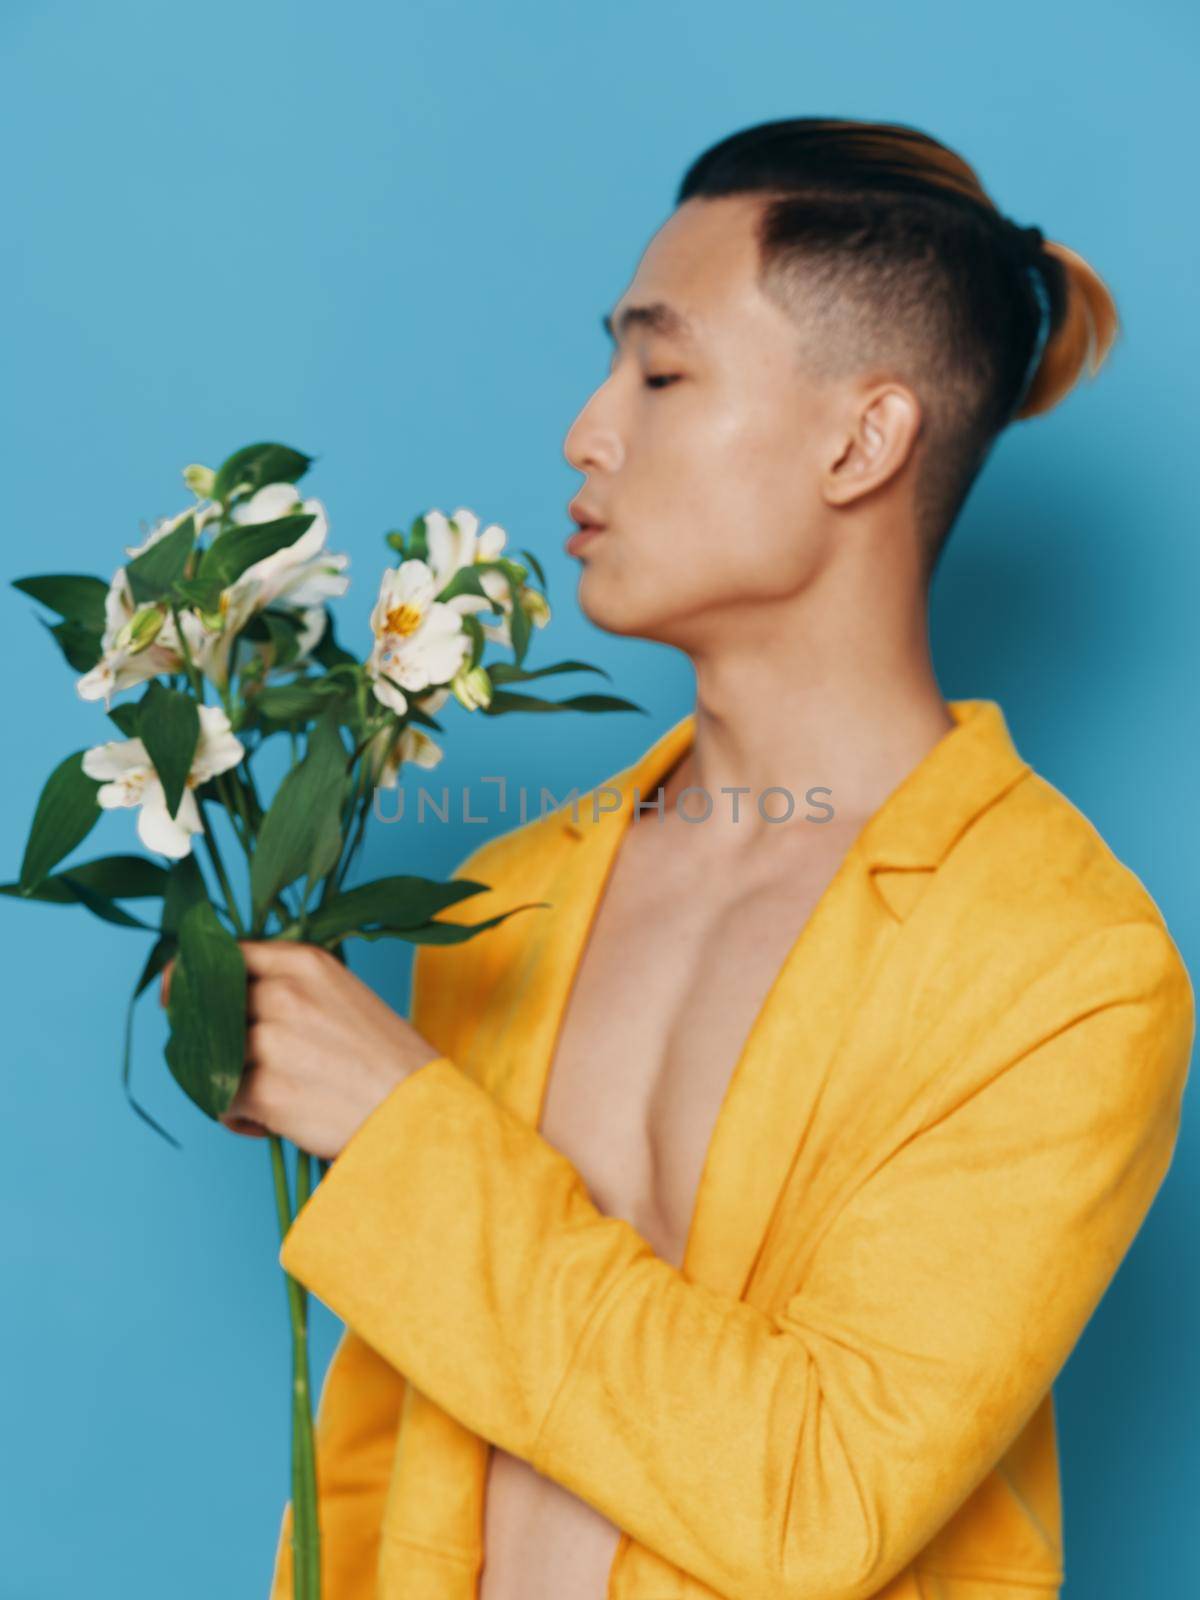 Nice guy with a bouquet of white flowers on a blue background in a yellow coat. High quality photo